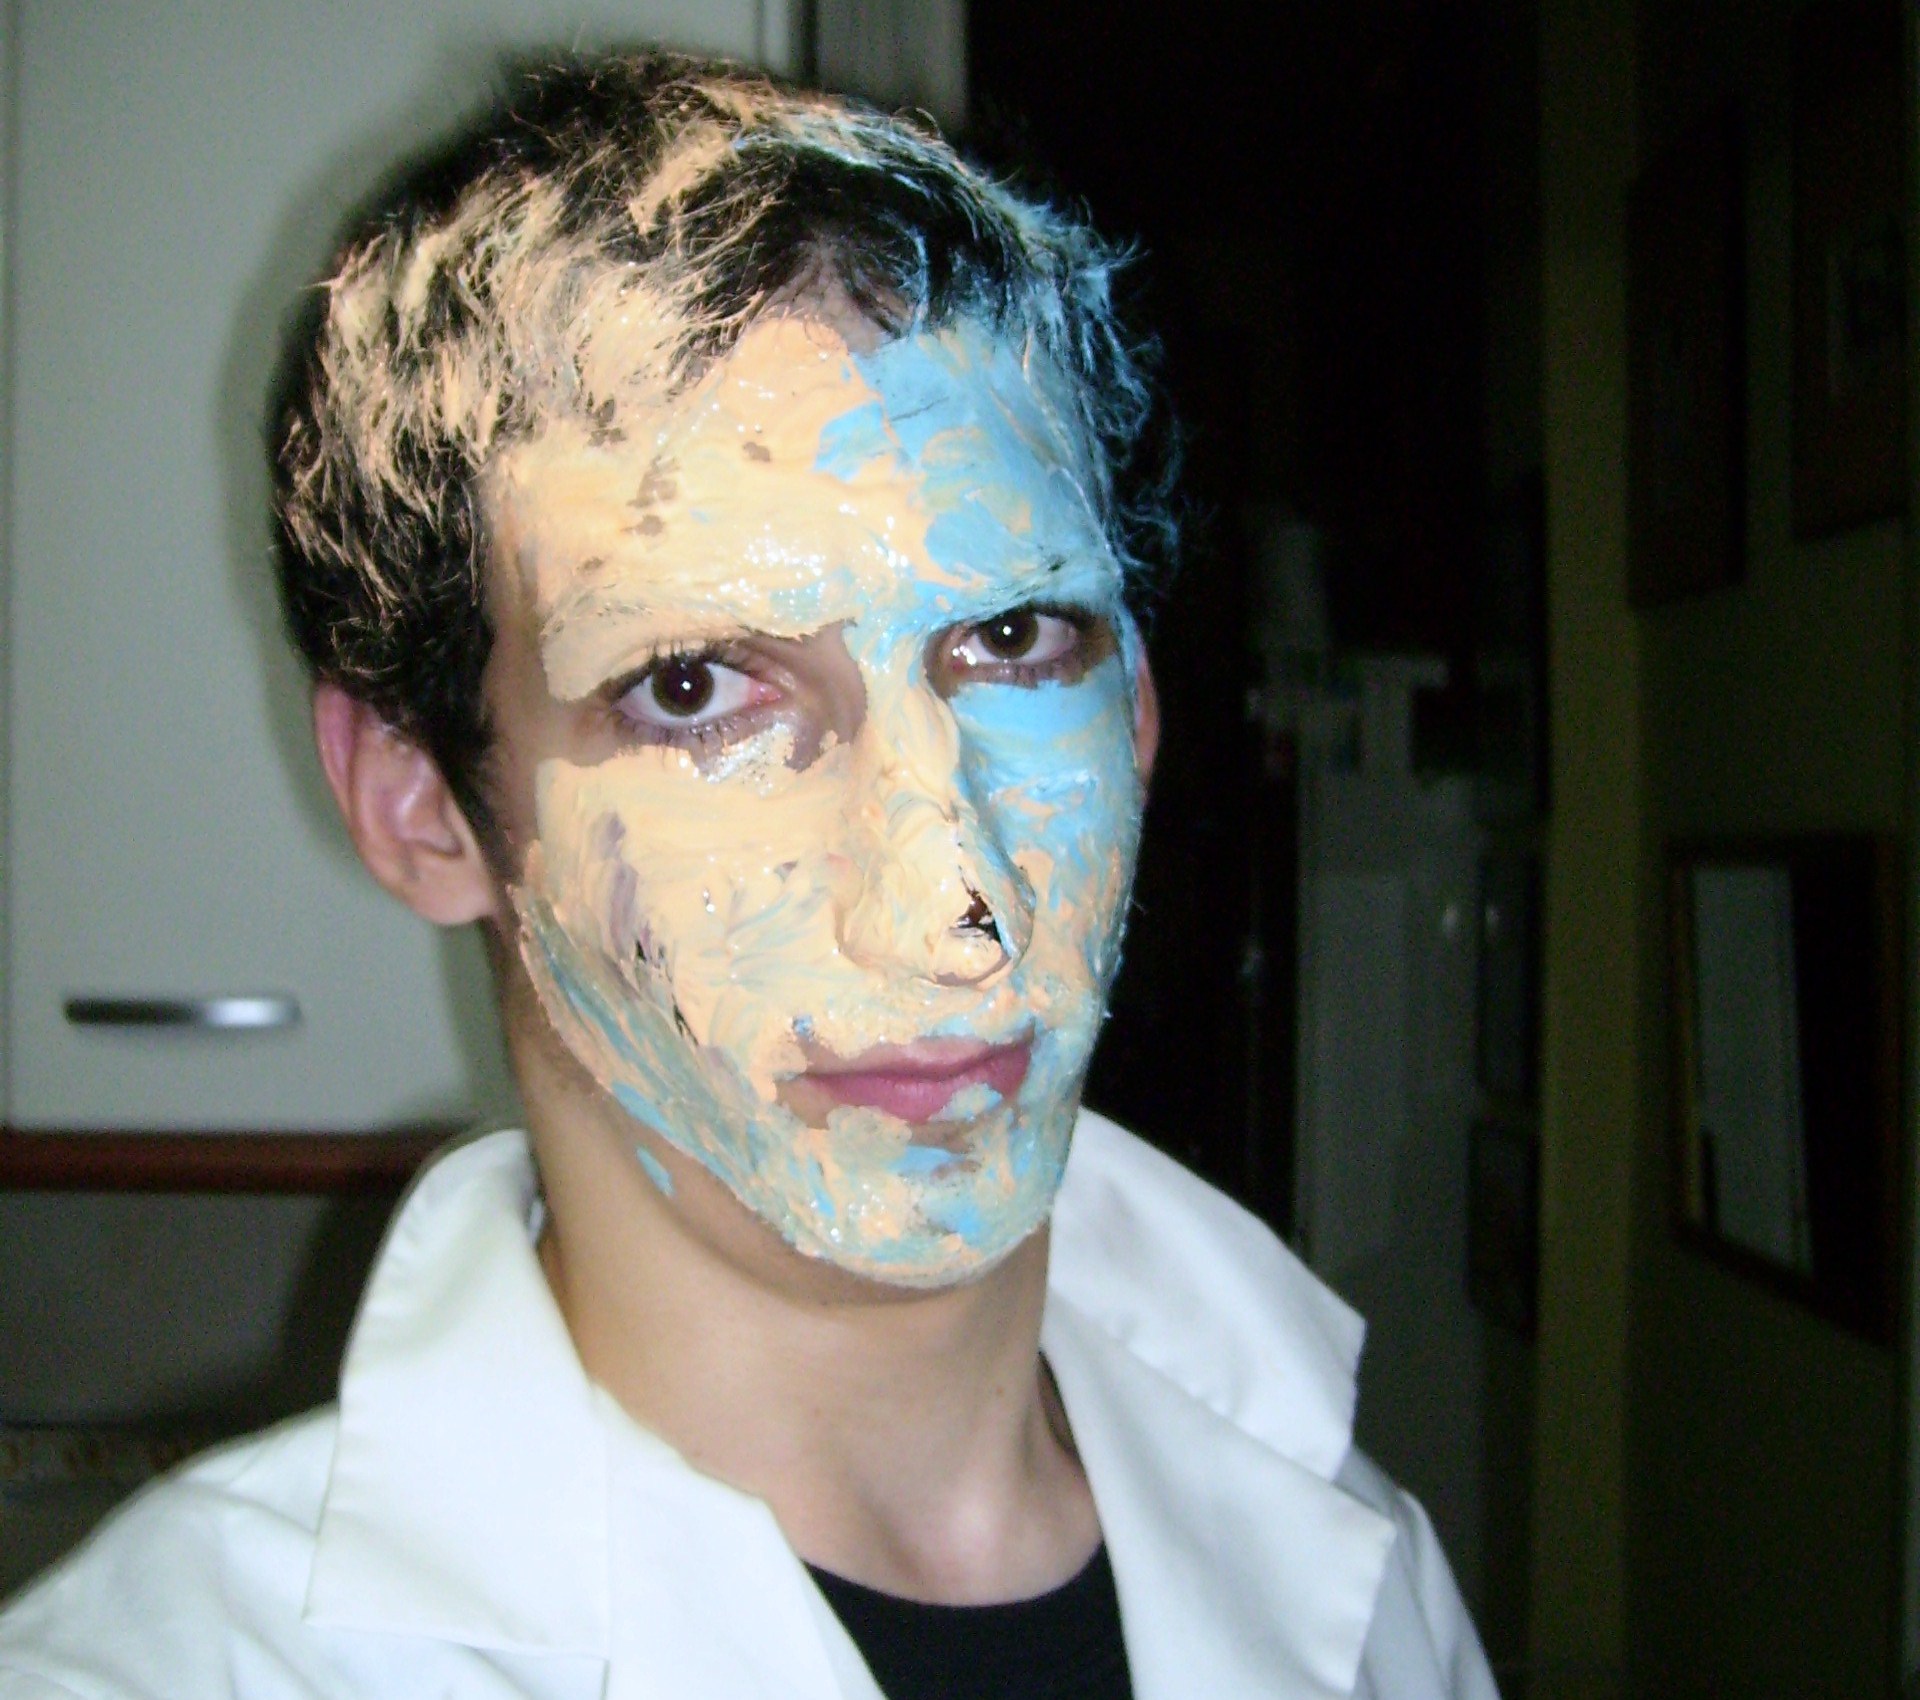 Josue Tonelli-Cueto at de 2010 with paint on his face